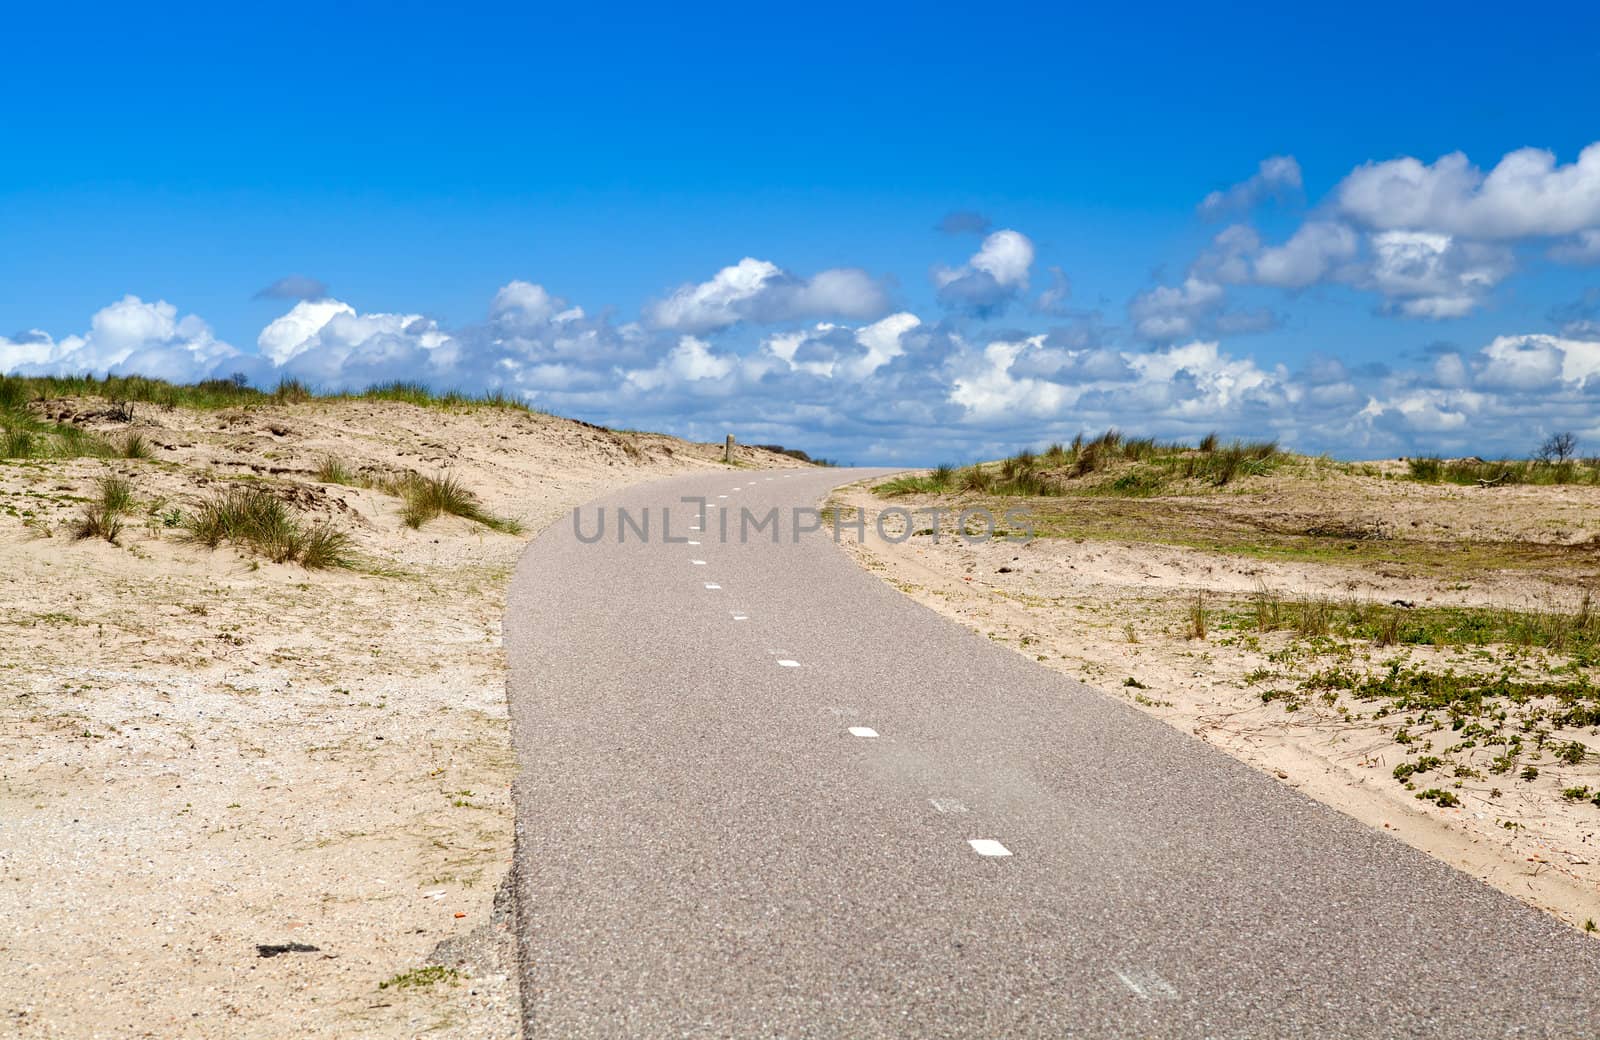 road between dunes to the blue sky with white clouds